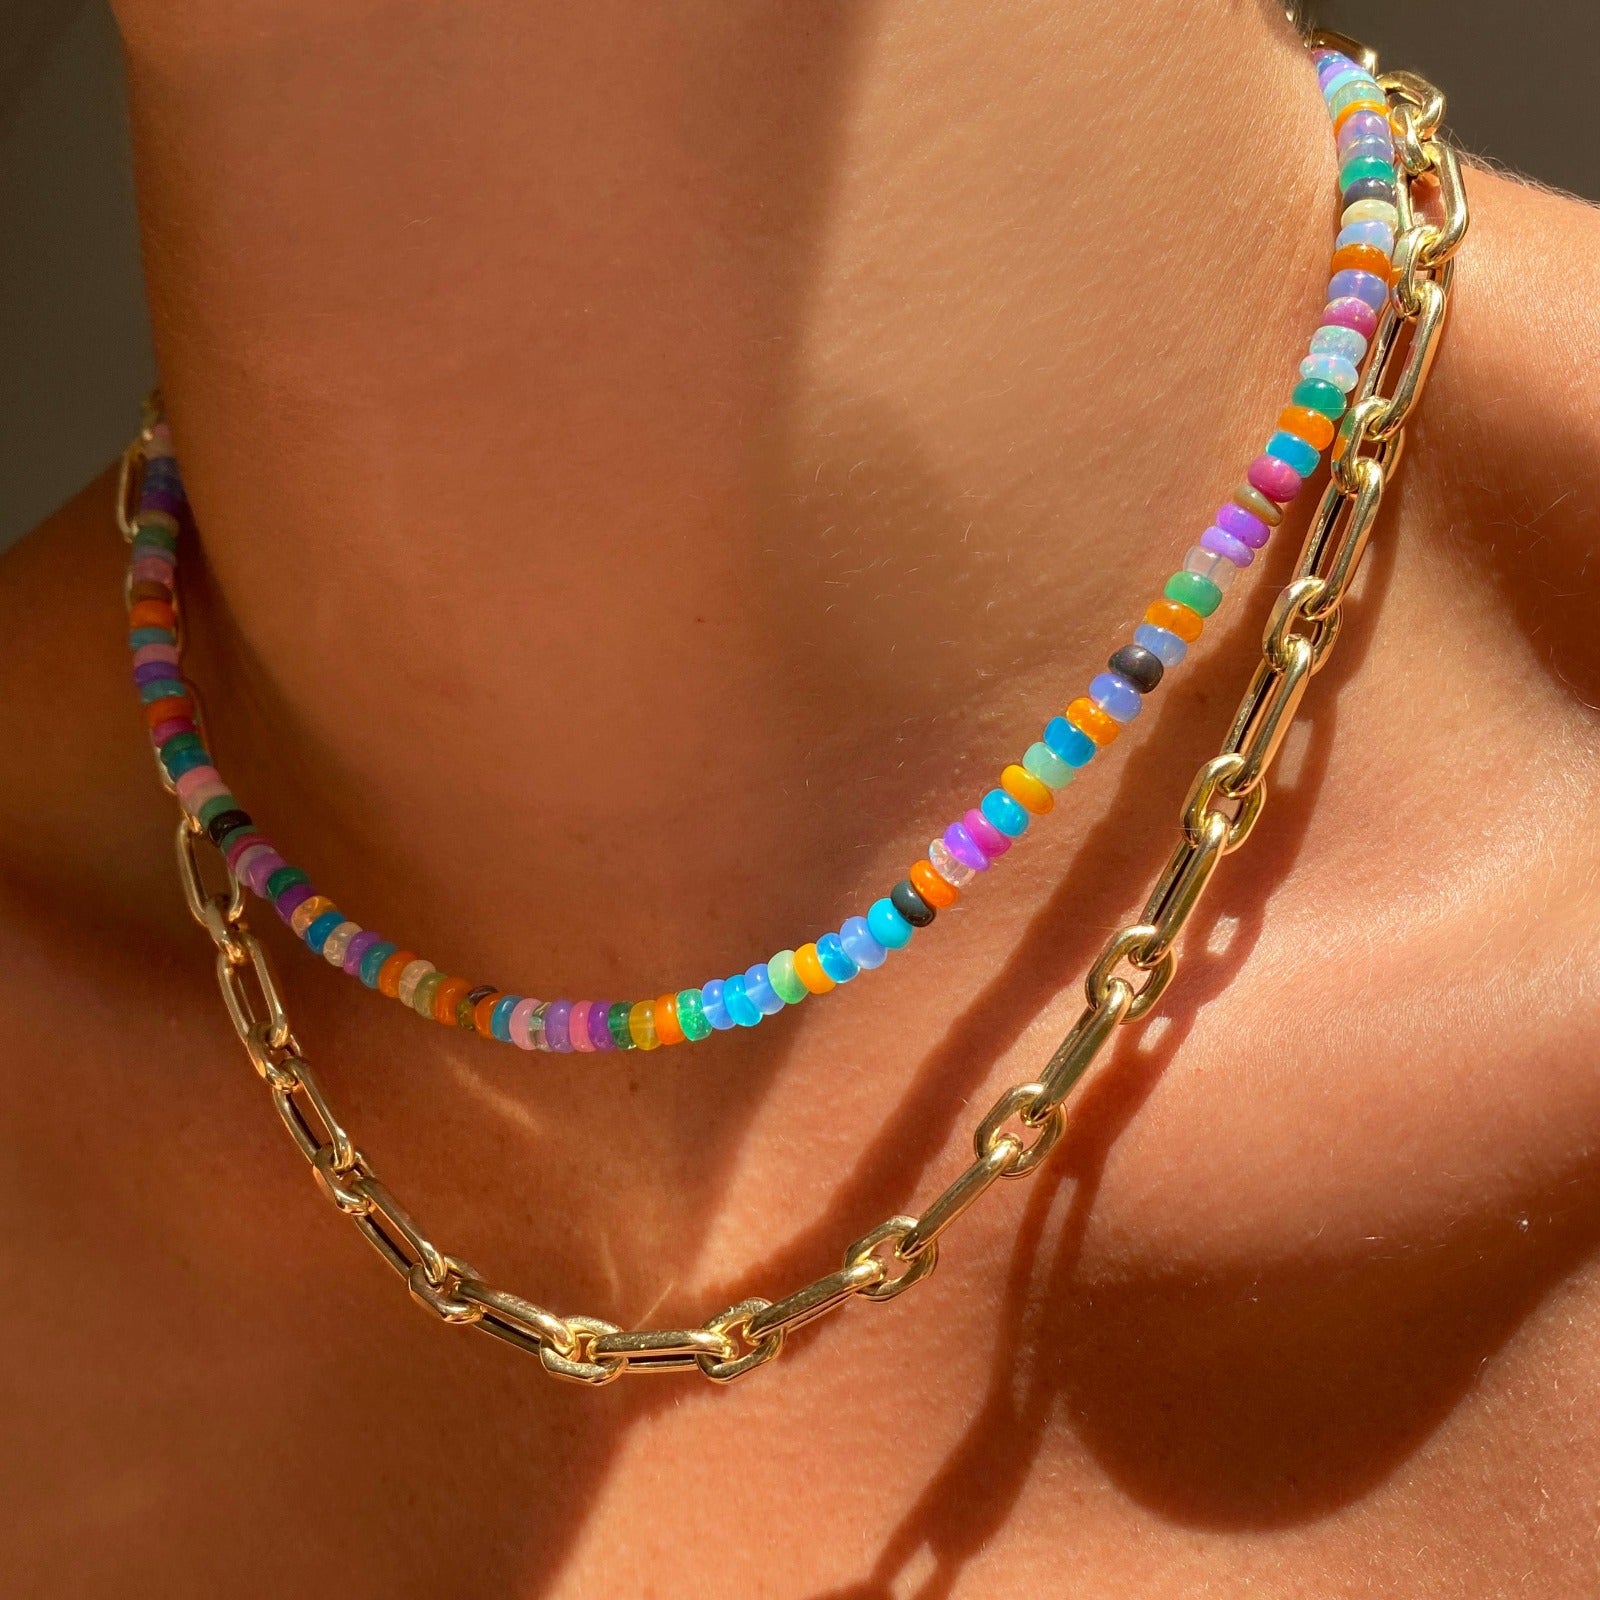 Shimmering beaded necklace made of smooth opal rondels in shades of fiery blues, hot pink, teal, and orange on a slim gold oval clasp. Styled on a neck layered with the diamond cut chain link necklace.